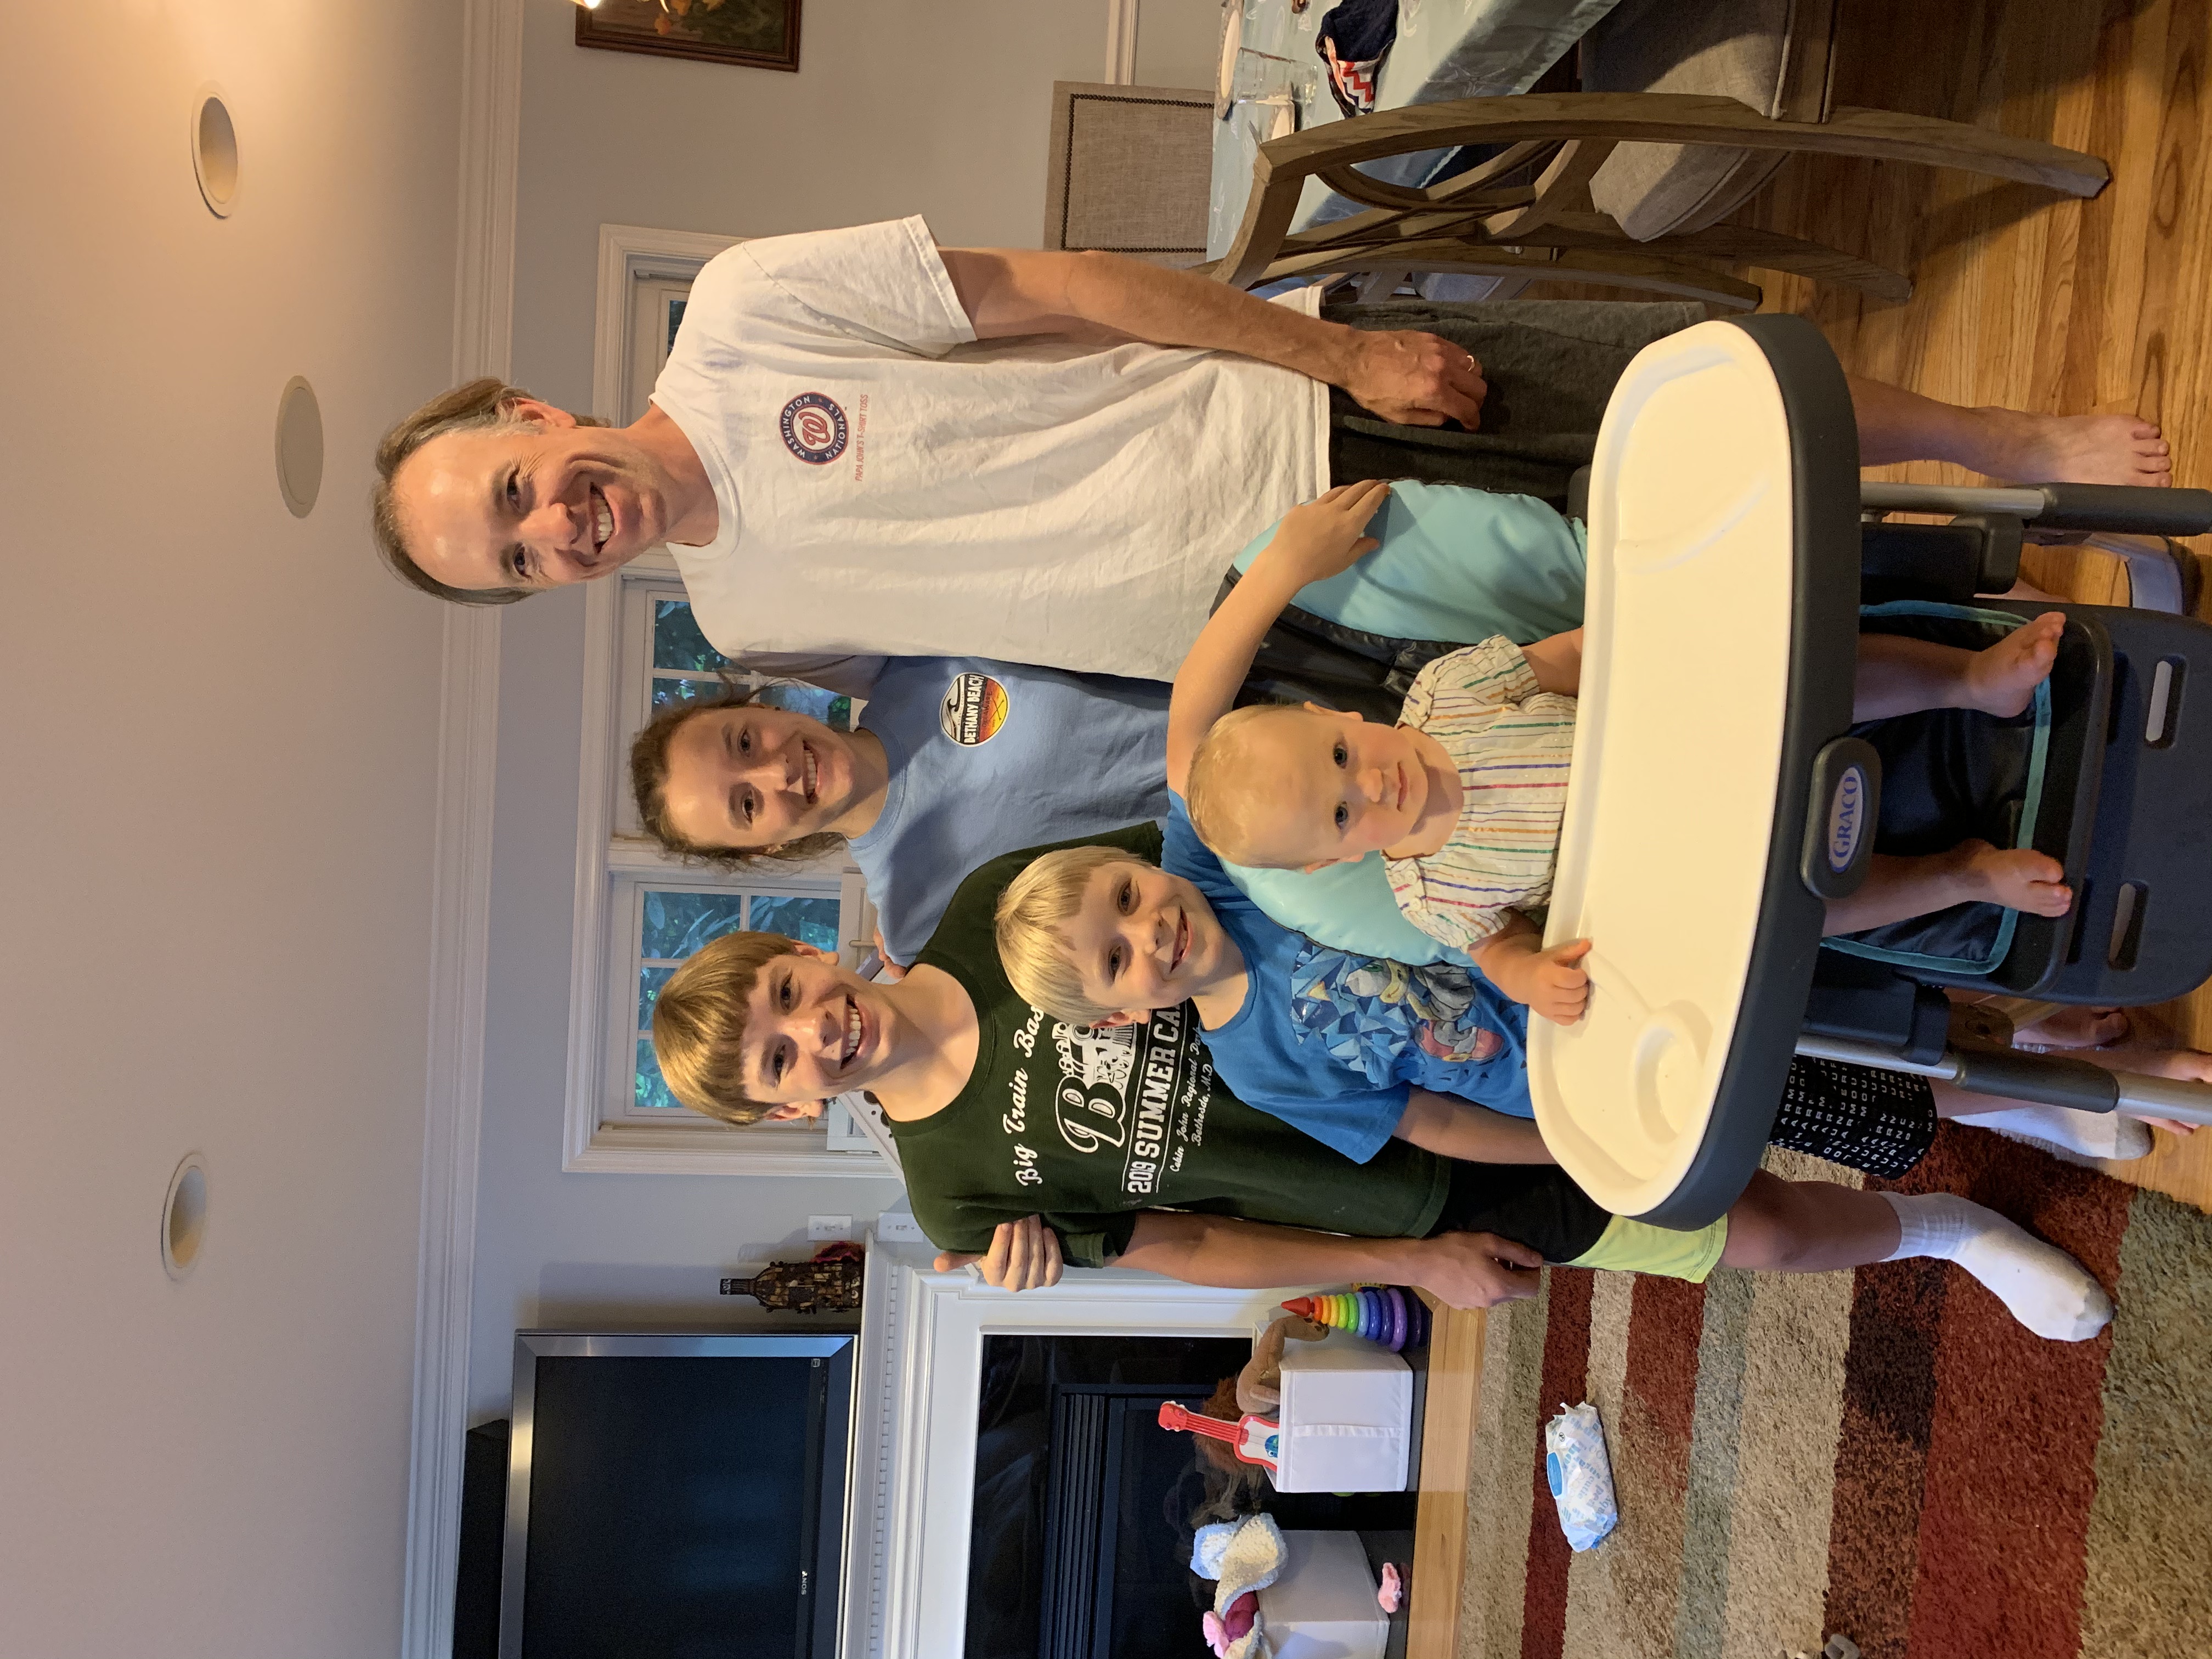 Eddie, Michelle, Chris, Sean, and Leah posing while celebrating Leah's 1st birthday on June 28th, 2020